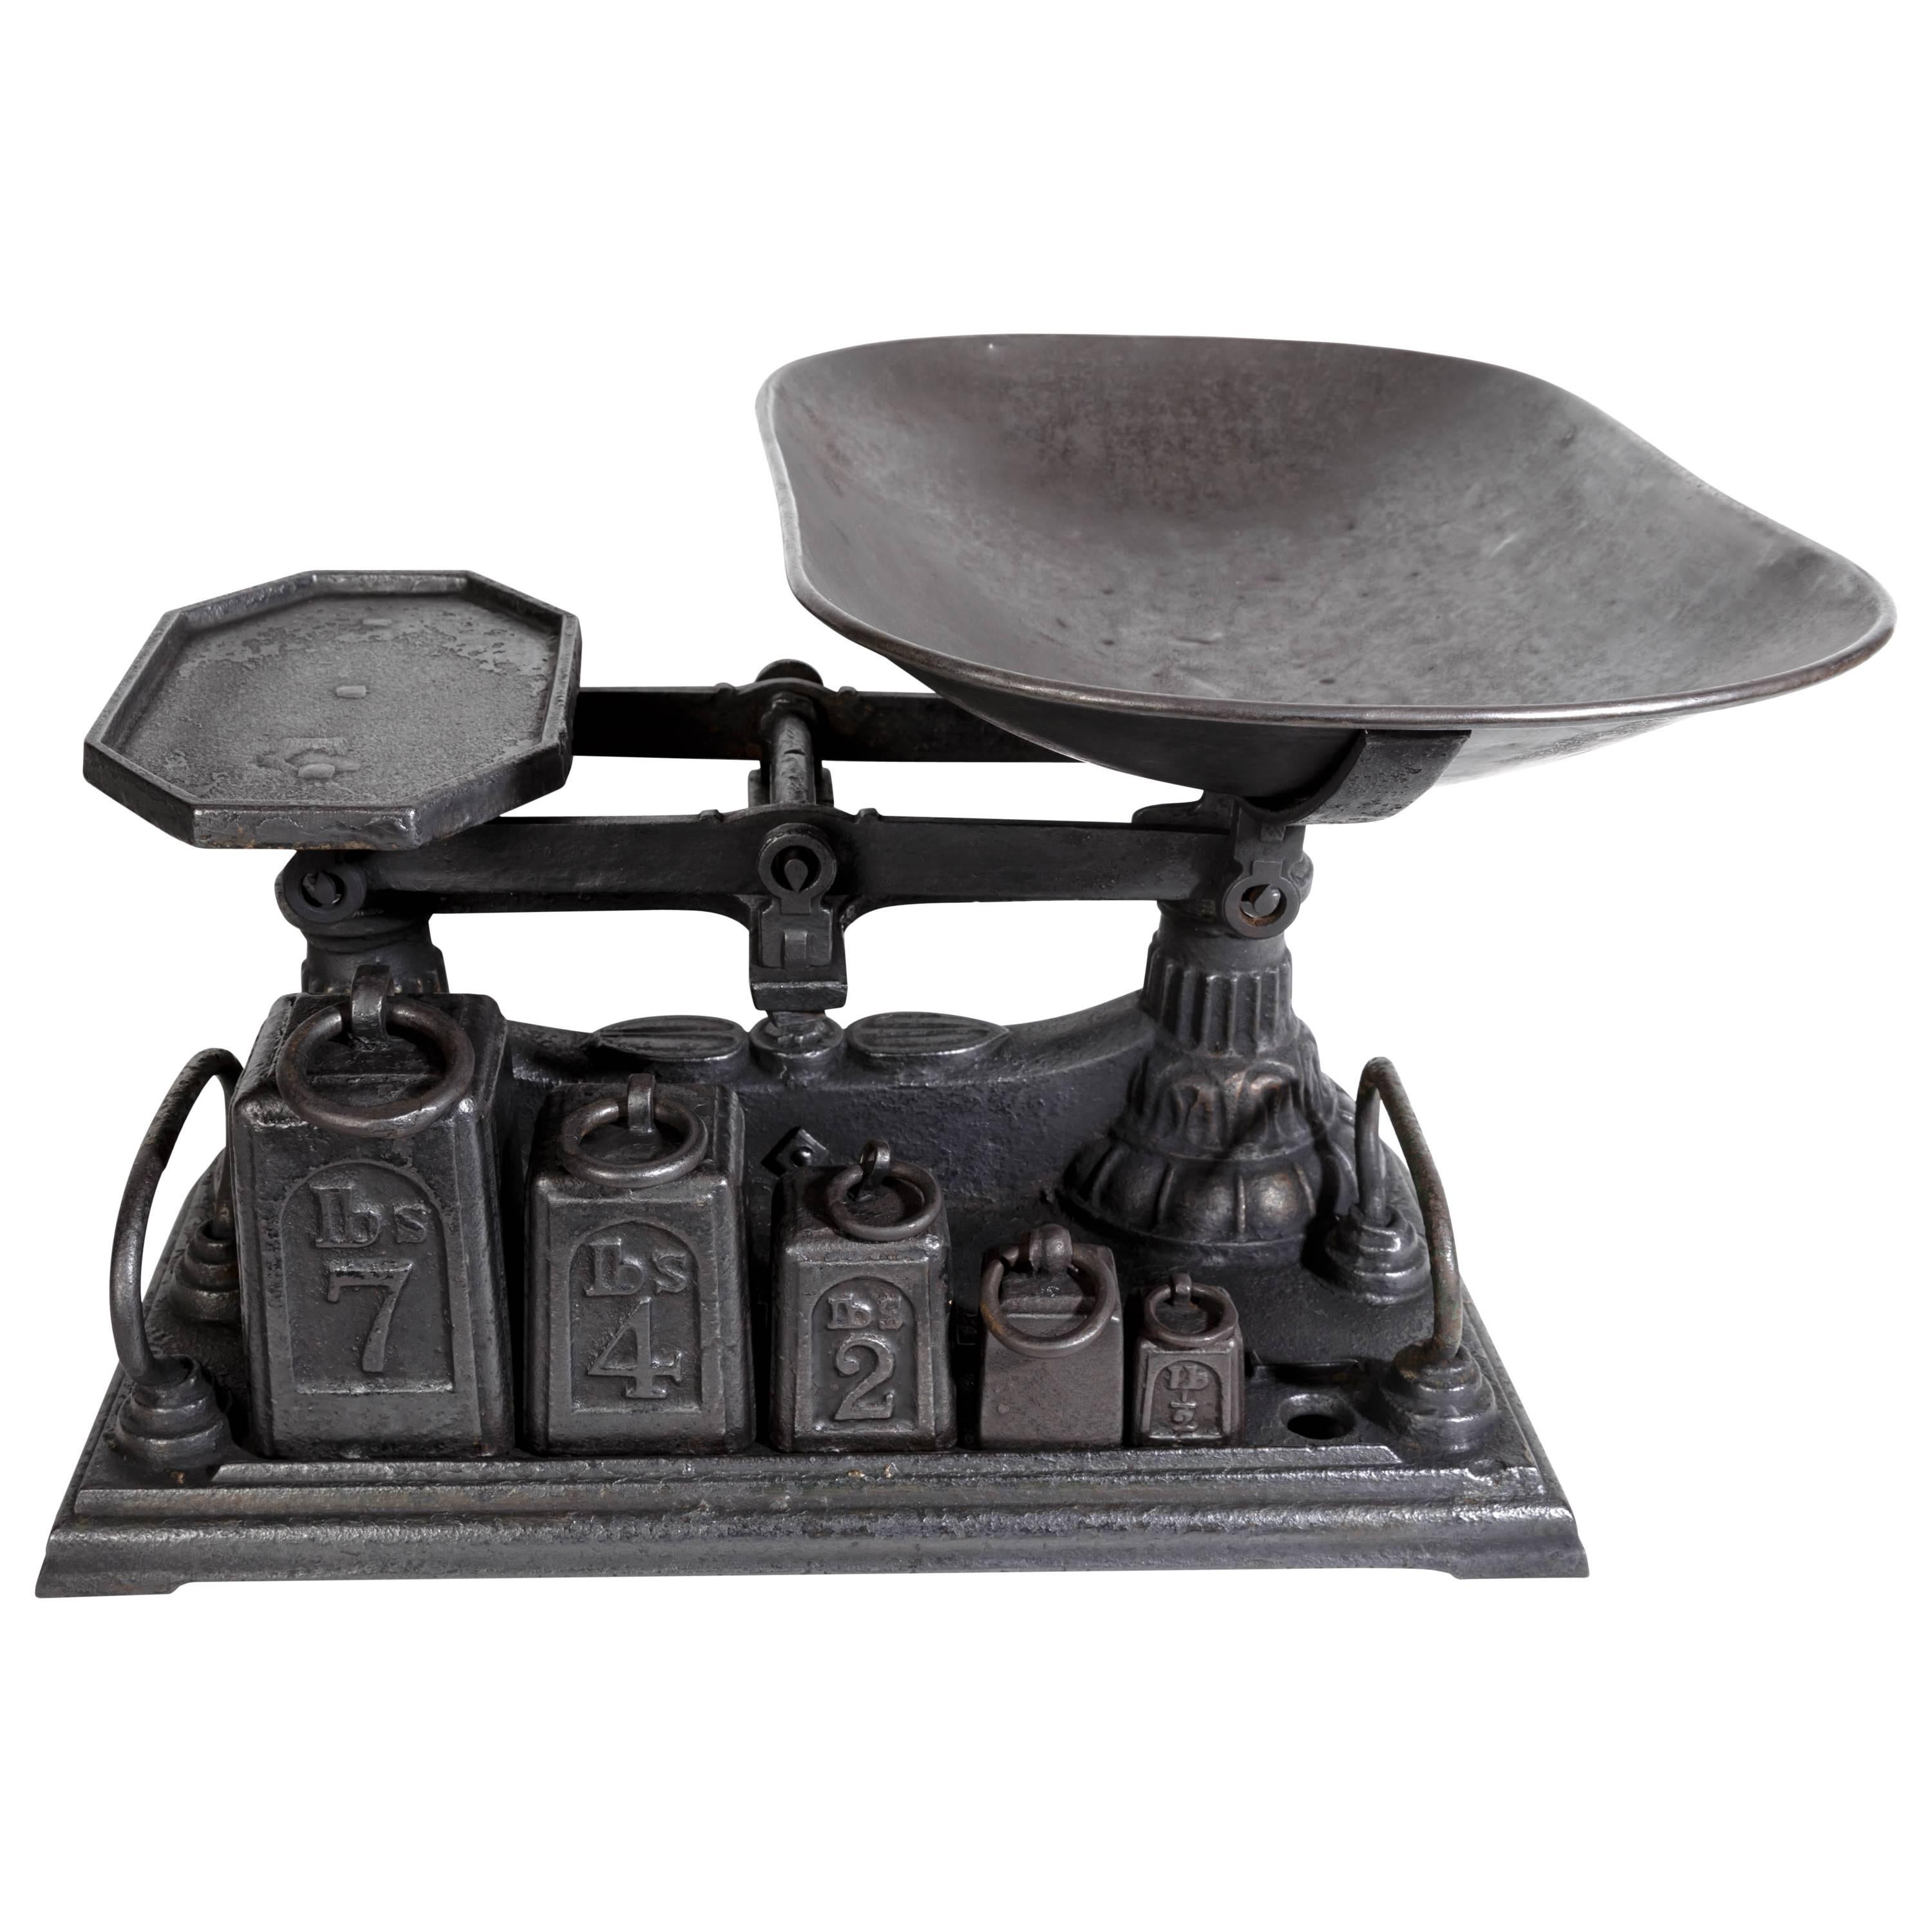 English, 19th Century Polished Cast Iron Scale For Sale